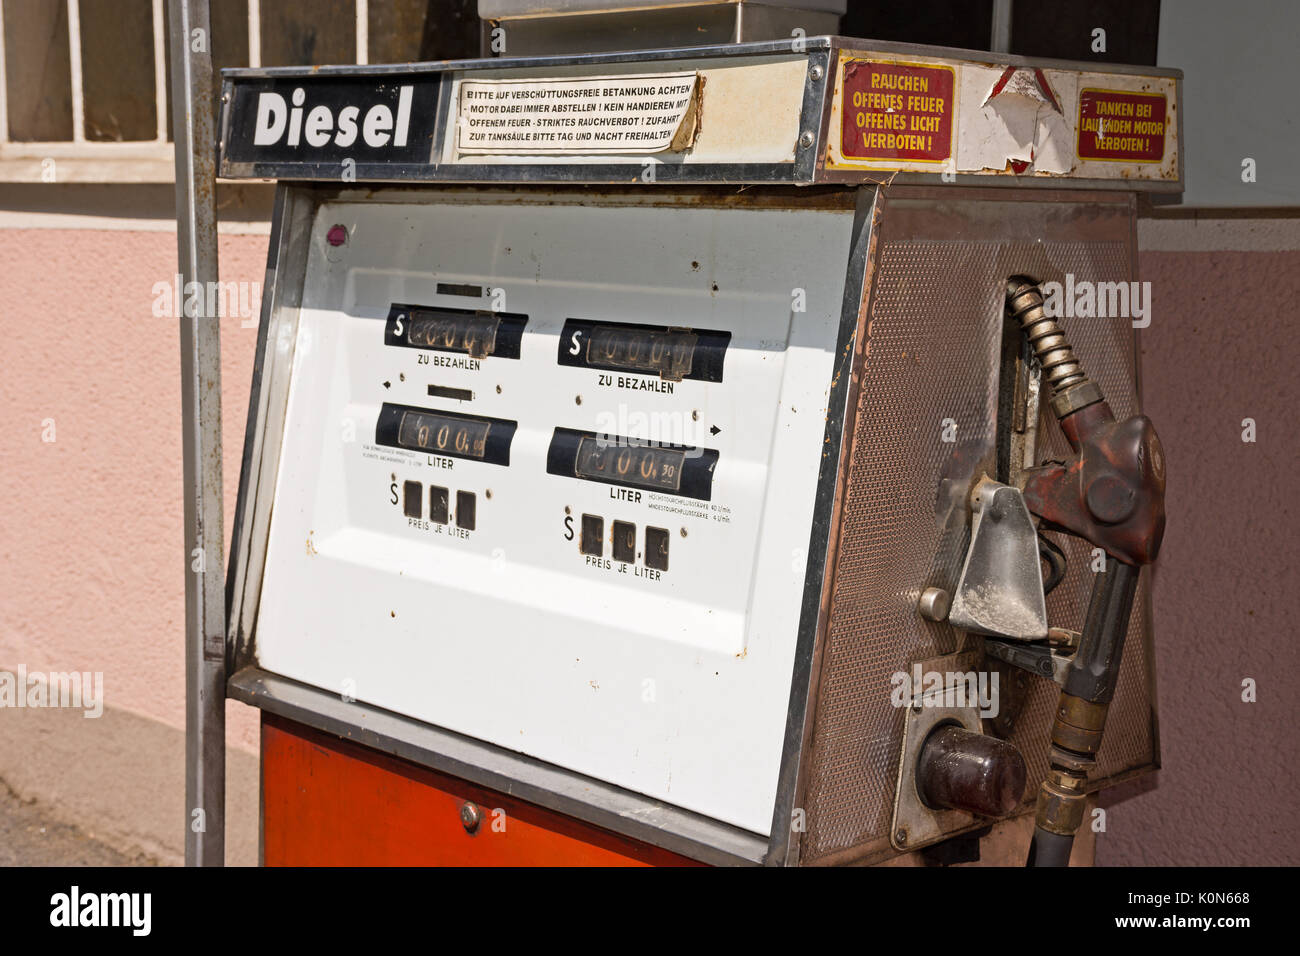 Old diesel petrol pump in Austria. Filling station in front of pink colored house. Warnings in German for safe refueling: stop engine, no open fire. Stock Photo